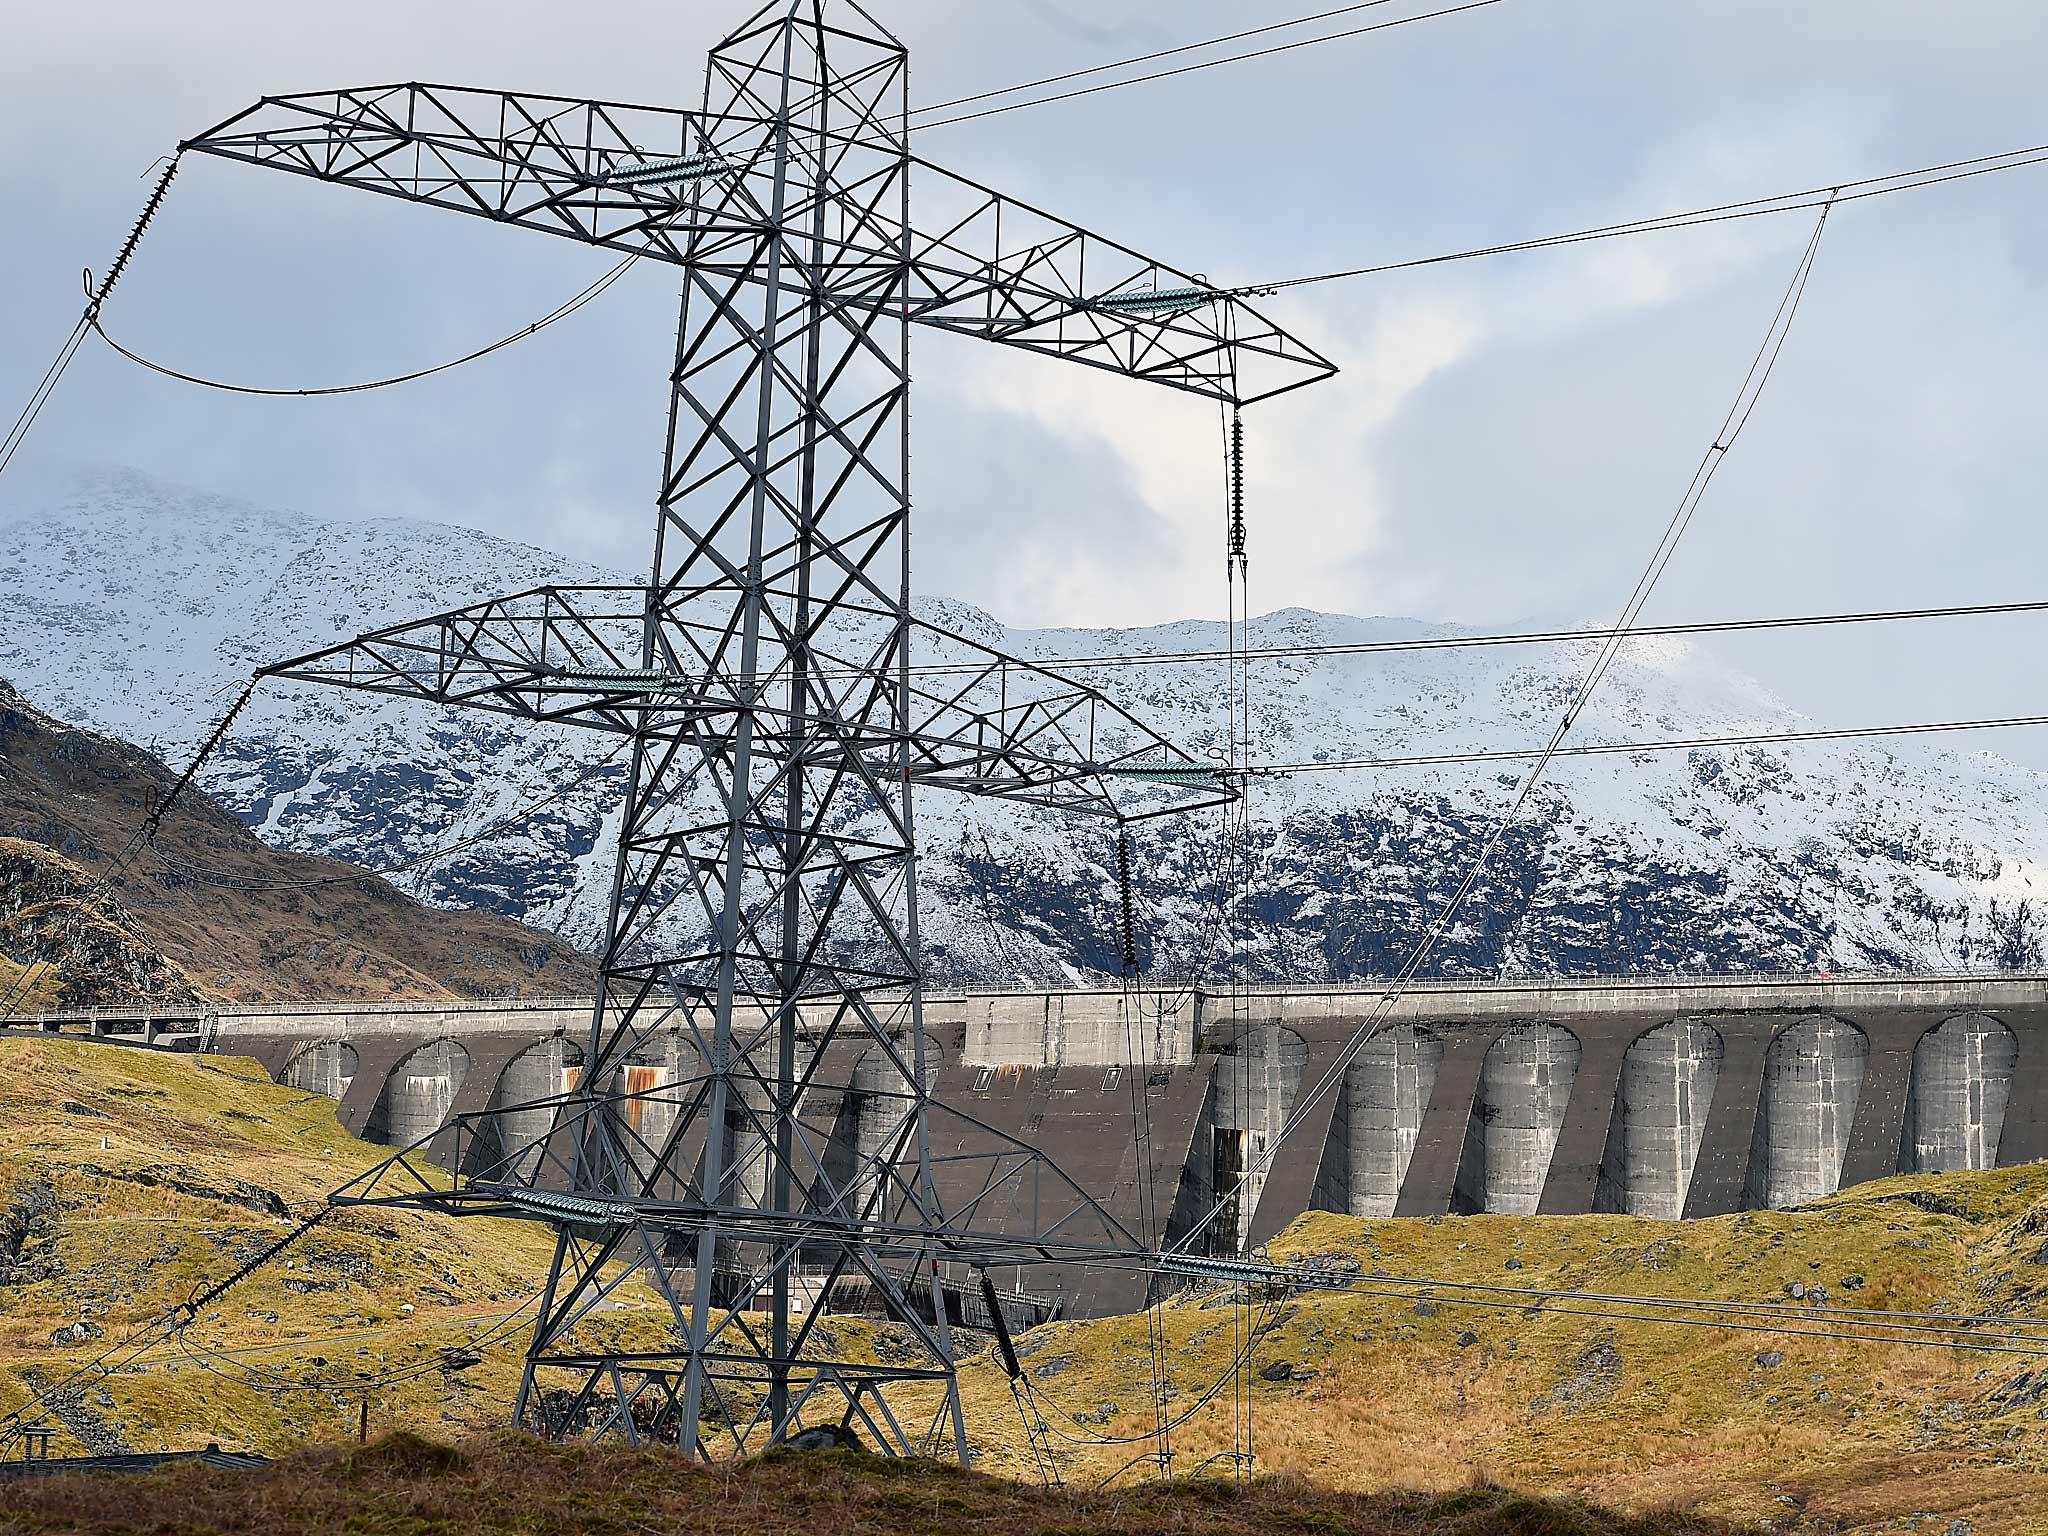 Hydro-electric schemes like this one on the slopes of Ben Cruachan supply Scotland with large amounts of clean, green energy